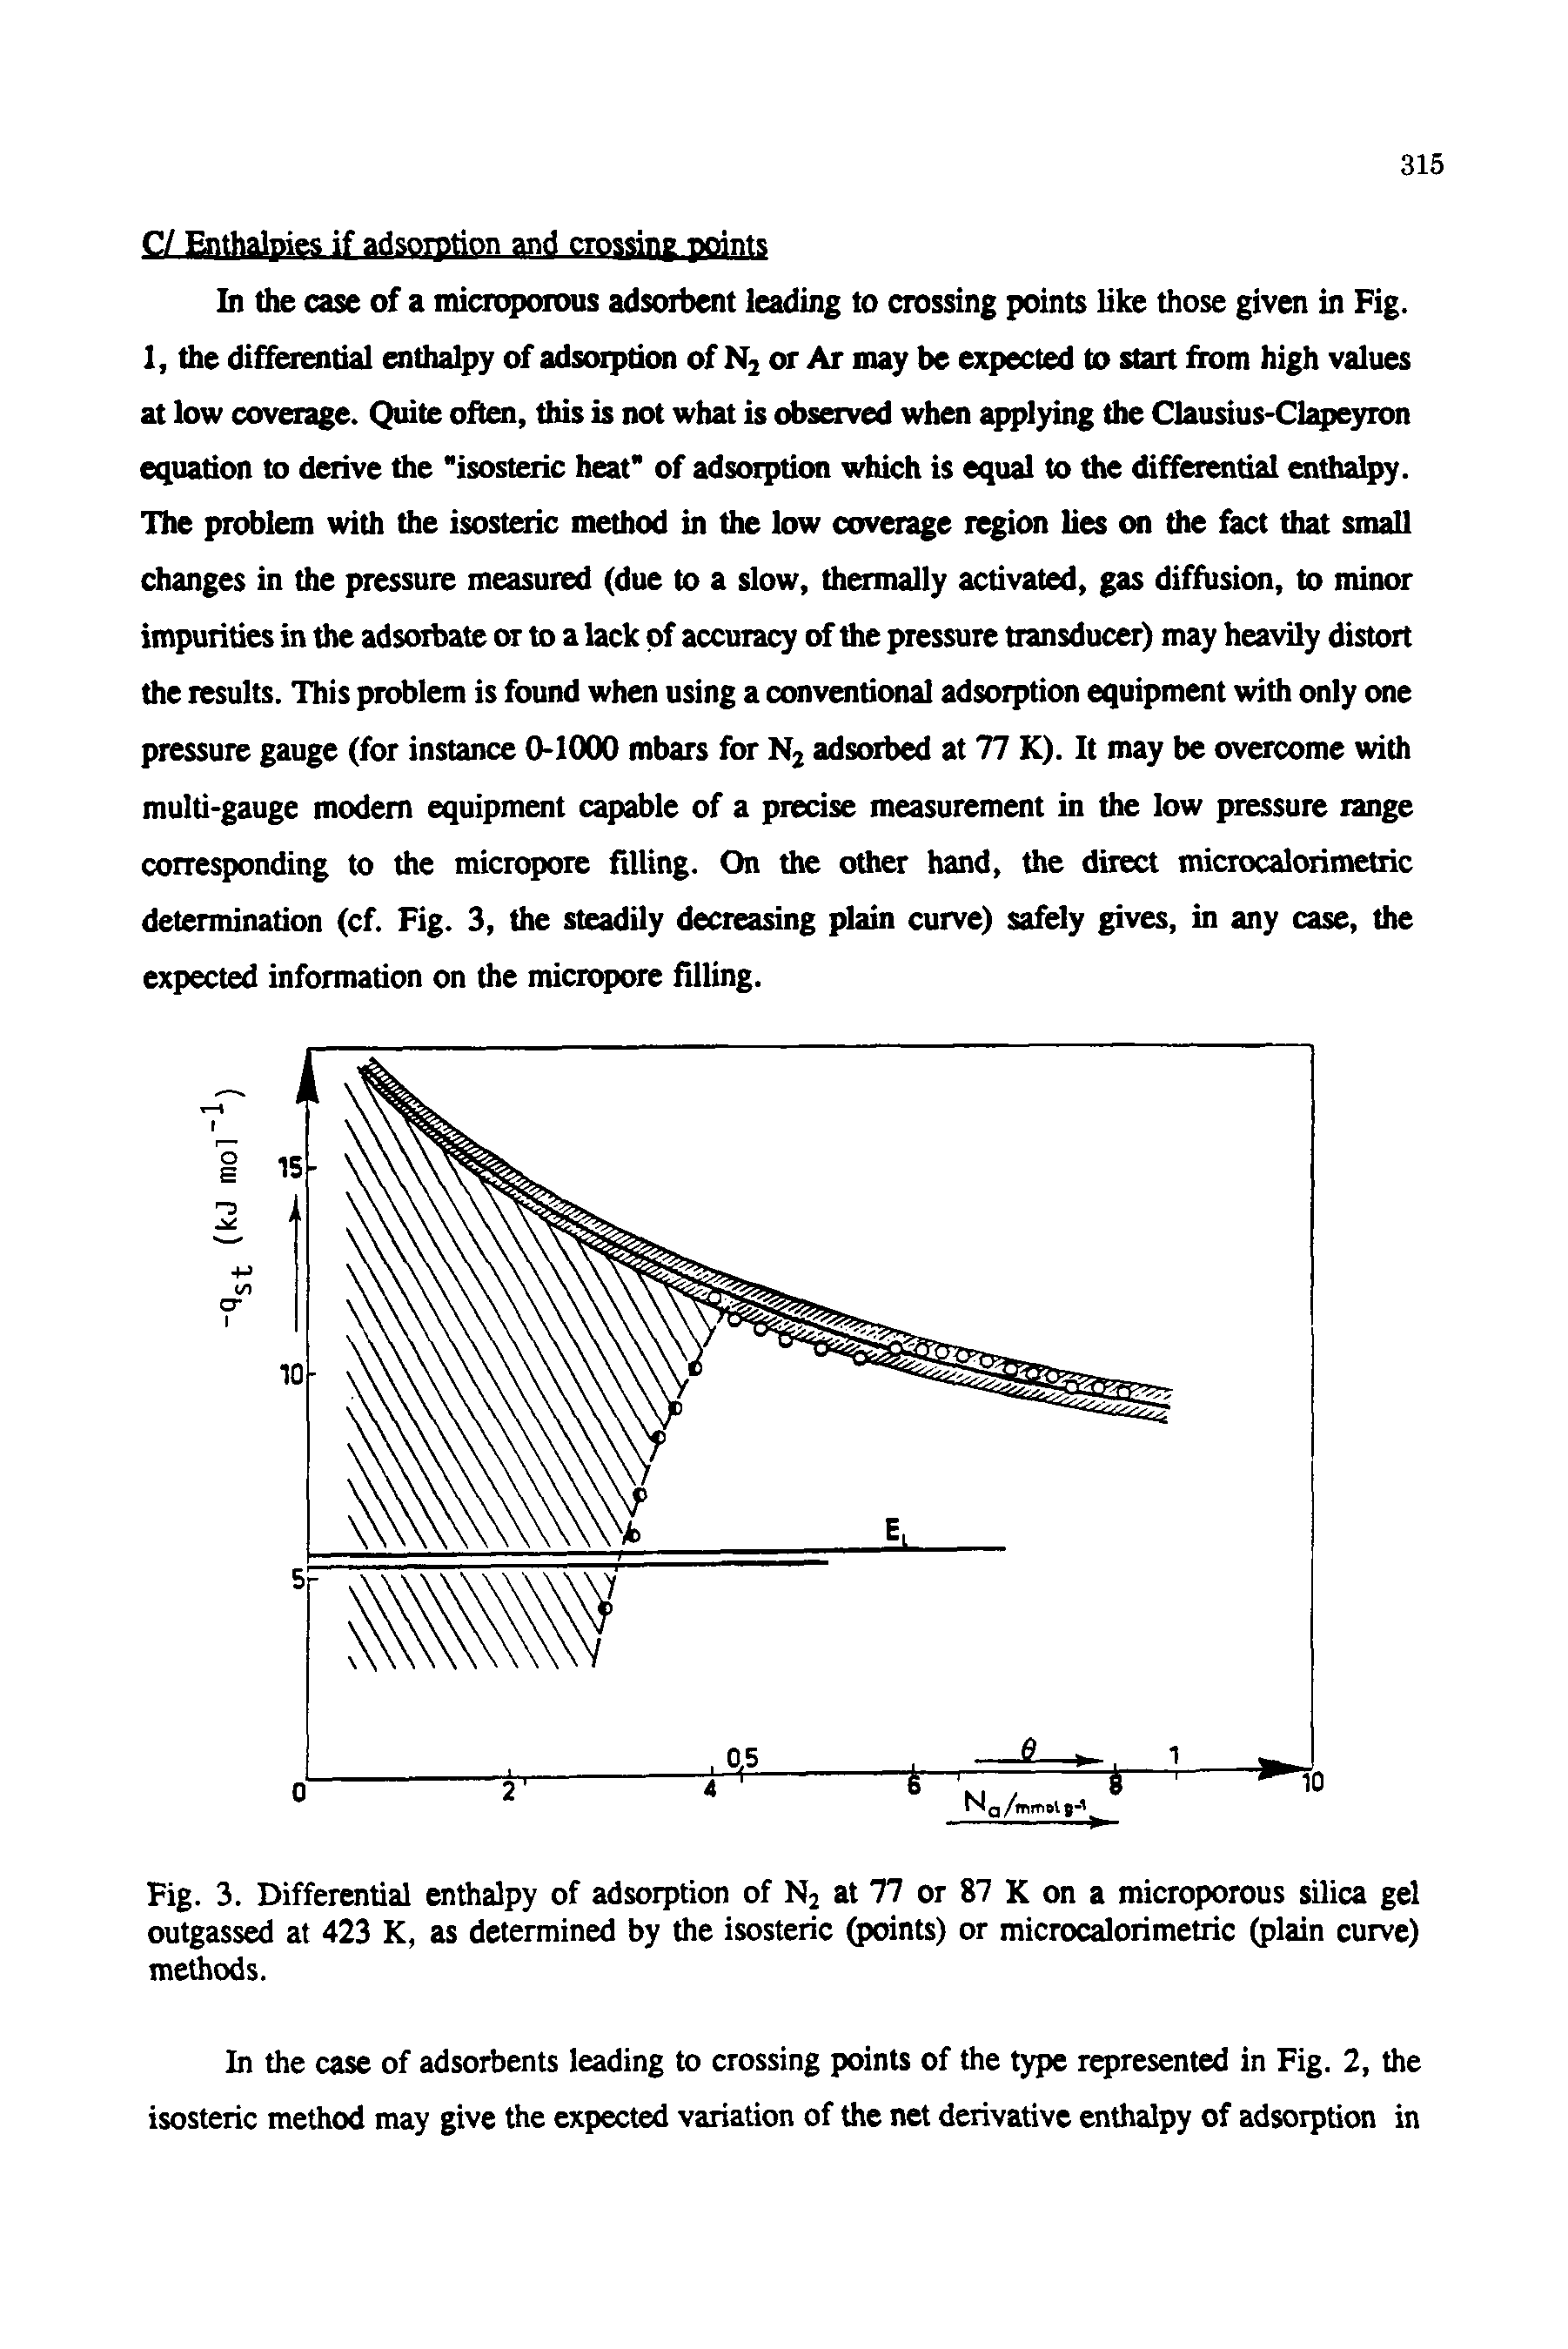 Fig. 3. Differential enthalpy of adsorption of N2 at 77 or 87 K on a microporous ica gel outgassed at 423 K, as determined by the isosteric nts) or microcalorimetric (plain curve) methods.